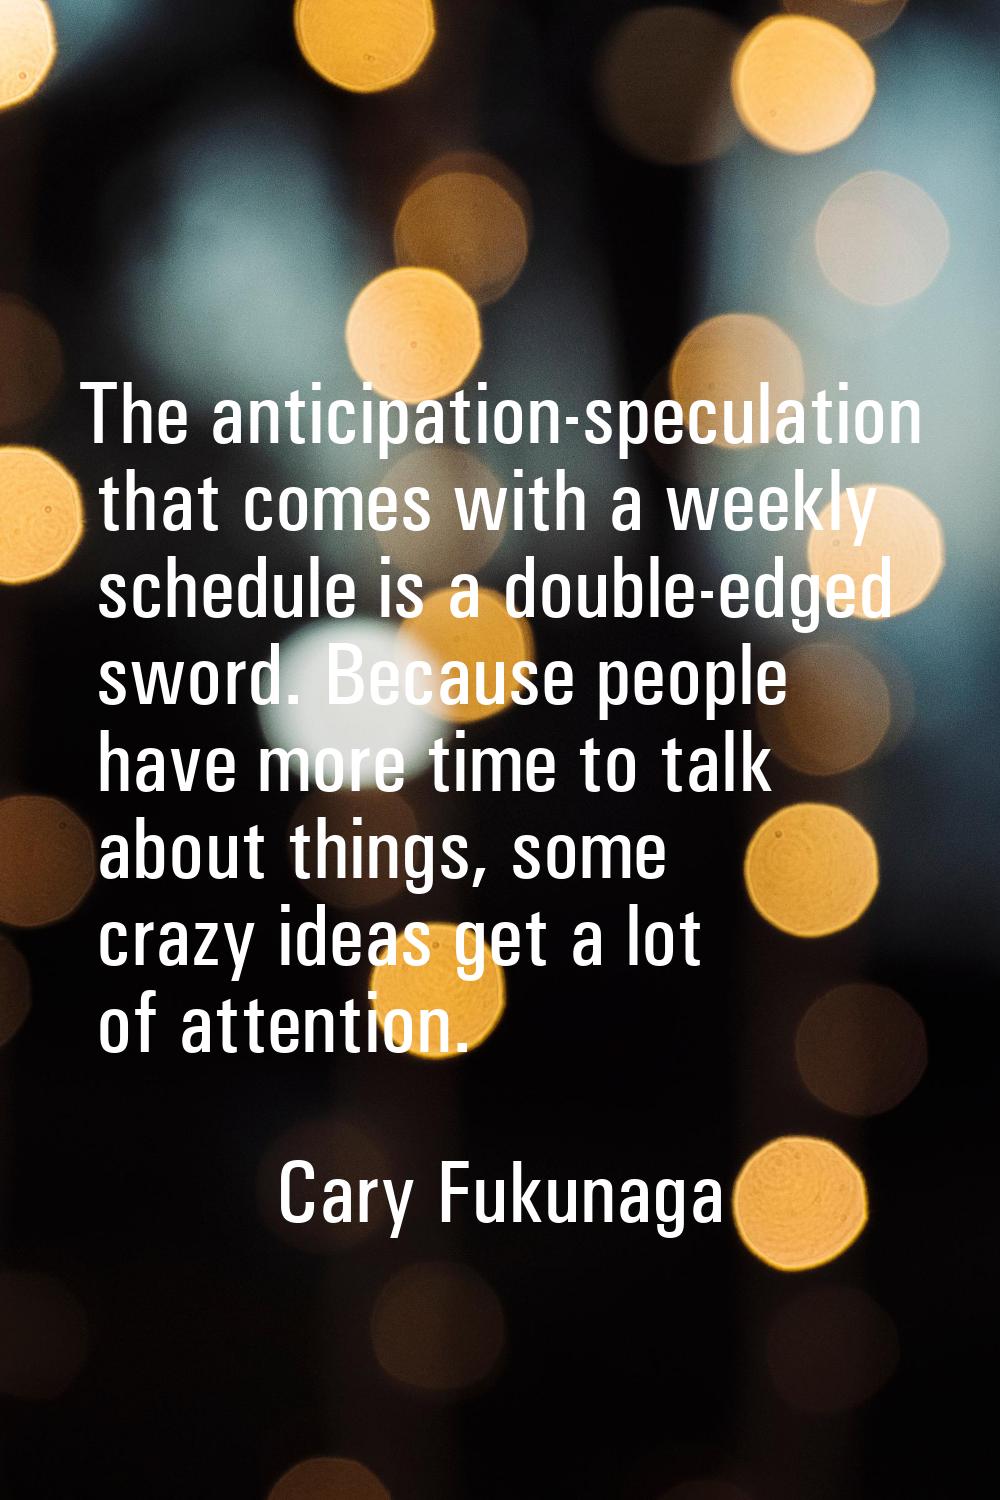 The anticipation-speculation that comes with a weekly schedule is a double-edged sword. Because peo